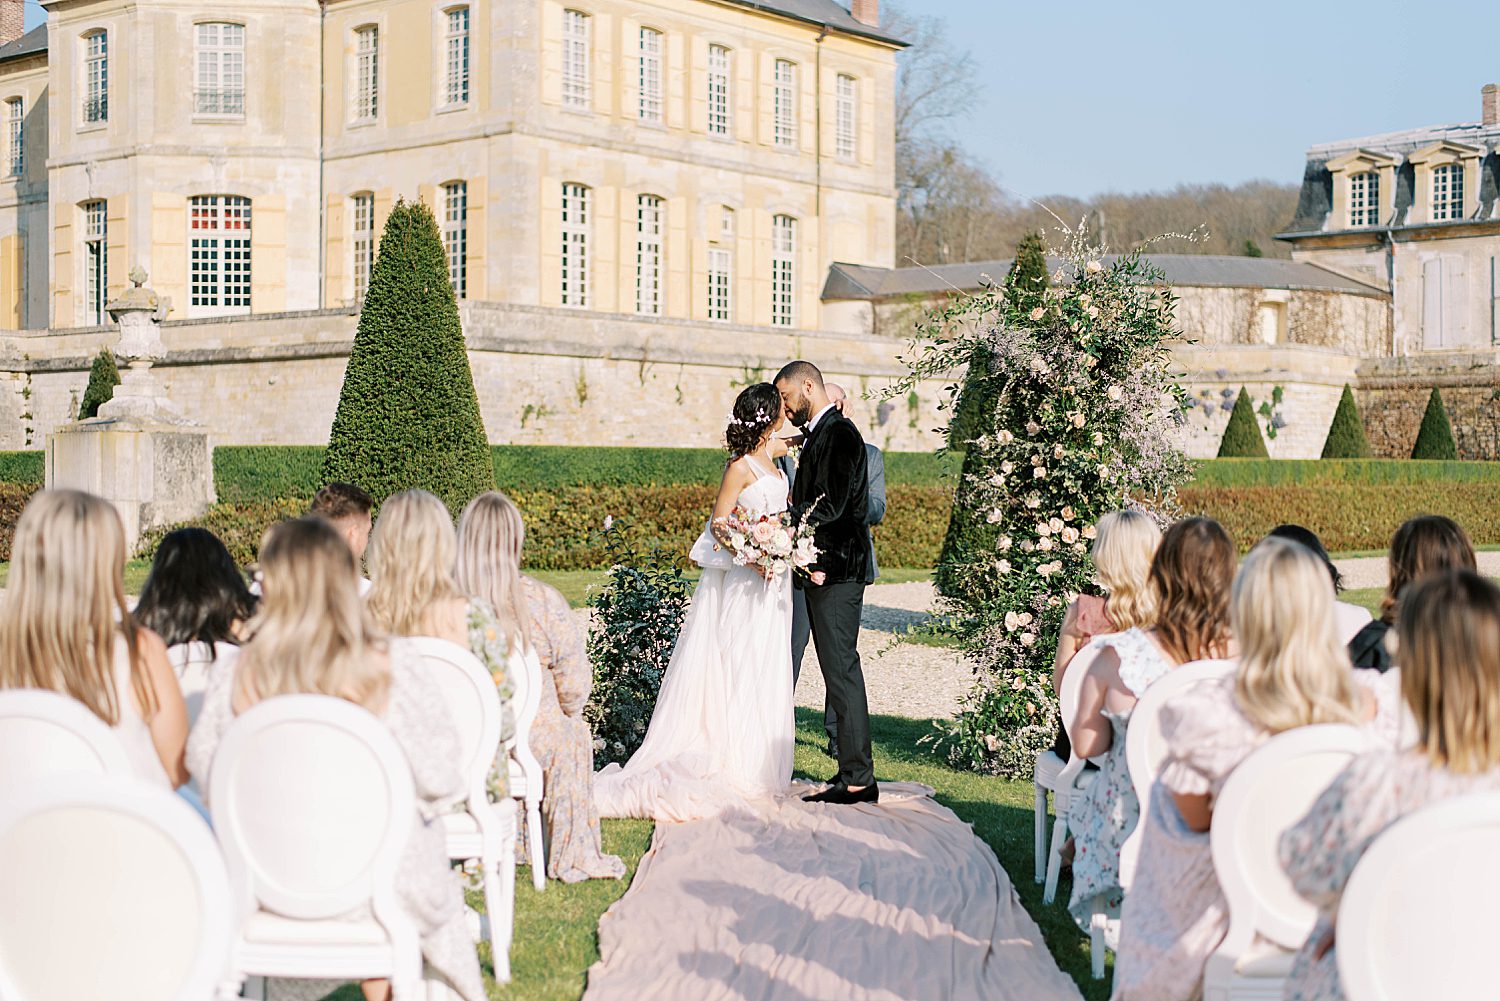 newlyweds kiss during wedding ceremony at Chateau de Villette